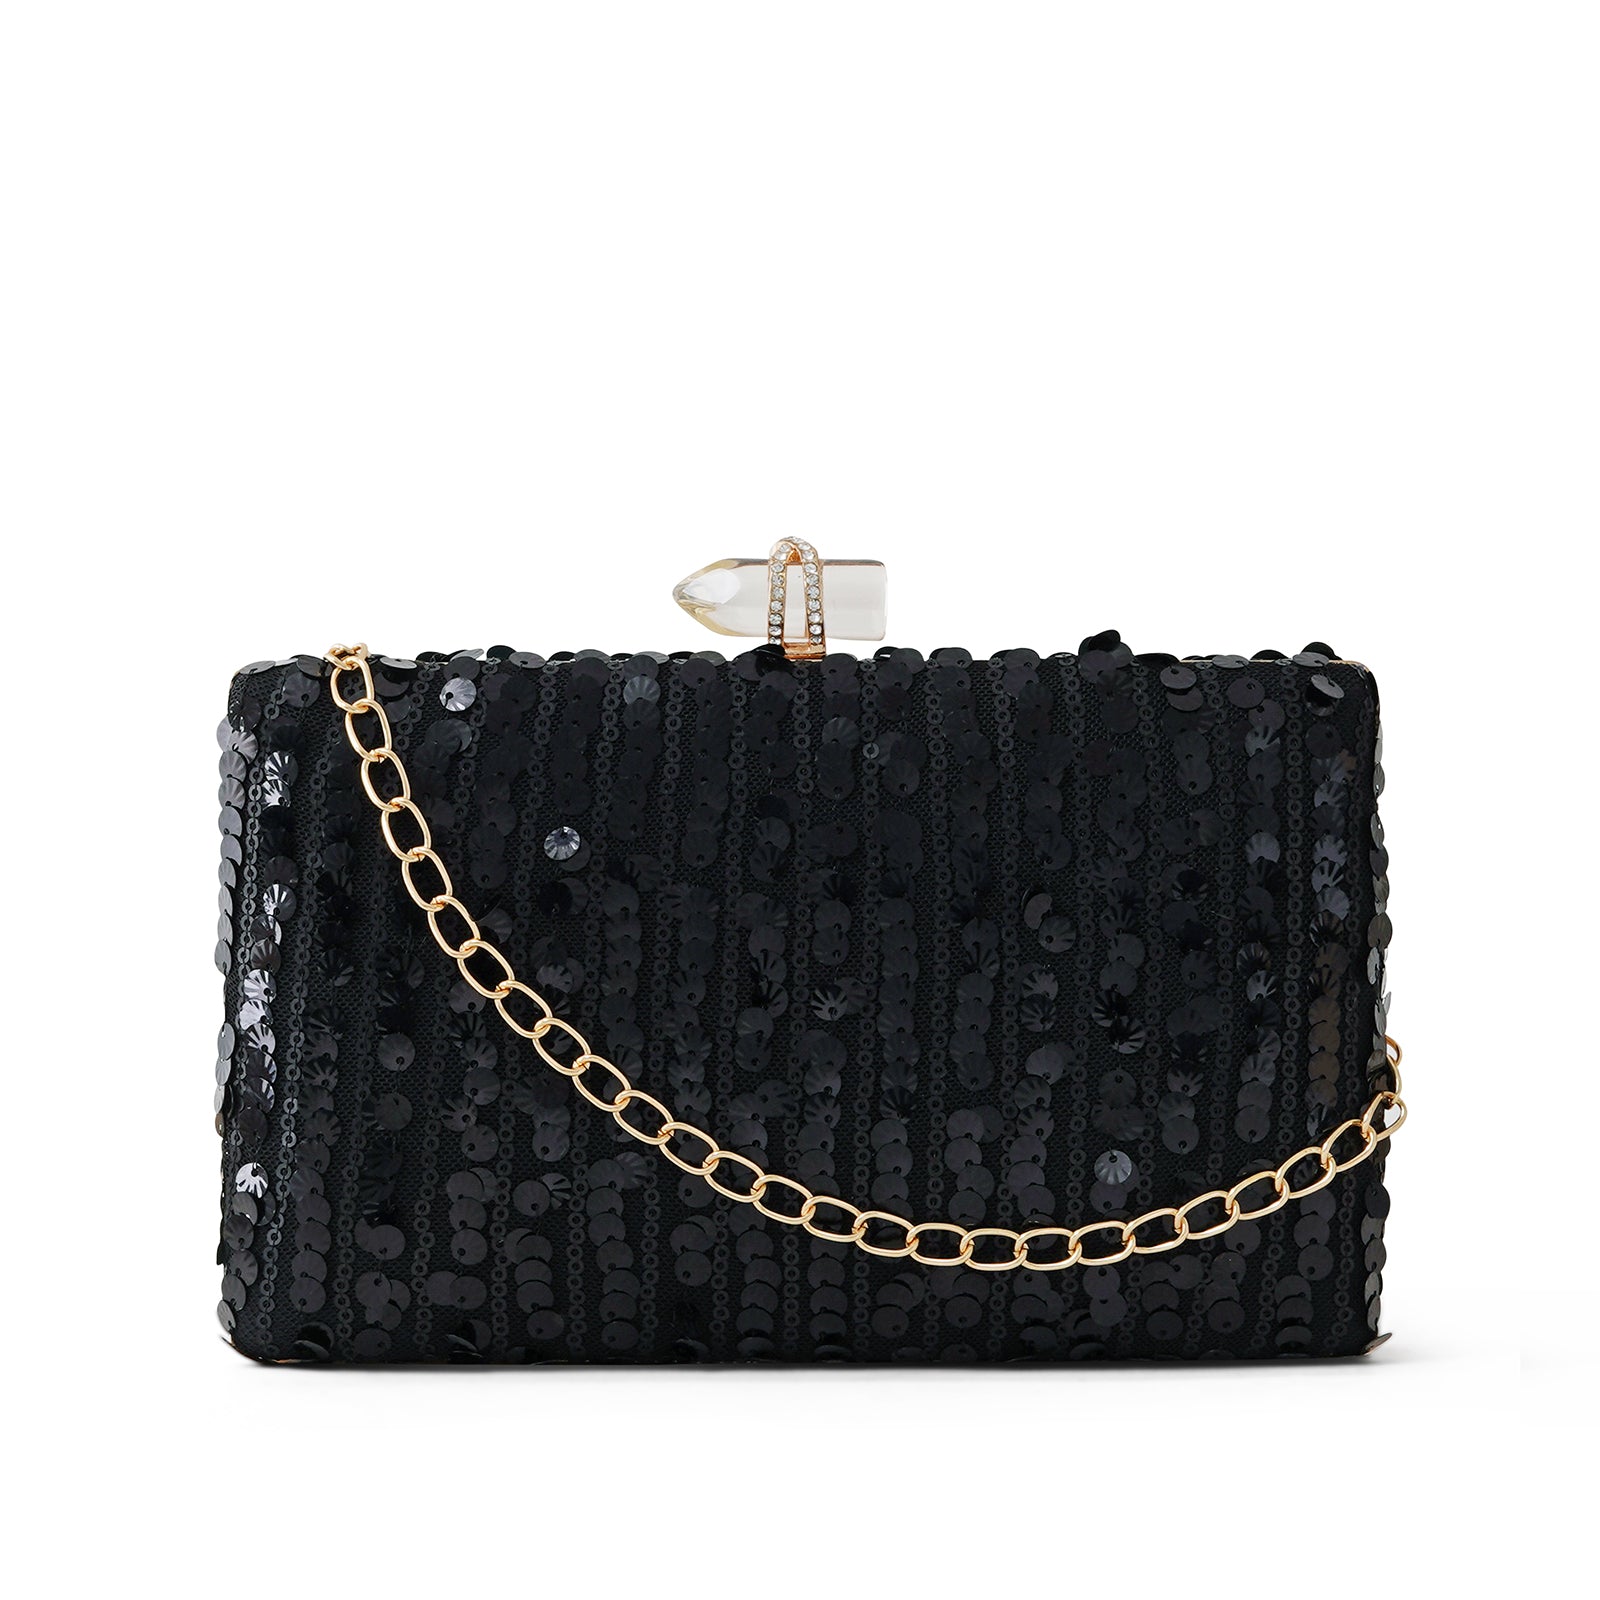 Women's Purse Black Sequined Brand New 3 different Carrying handles -  clothing & accessories - by owner - apparel sale...